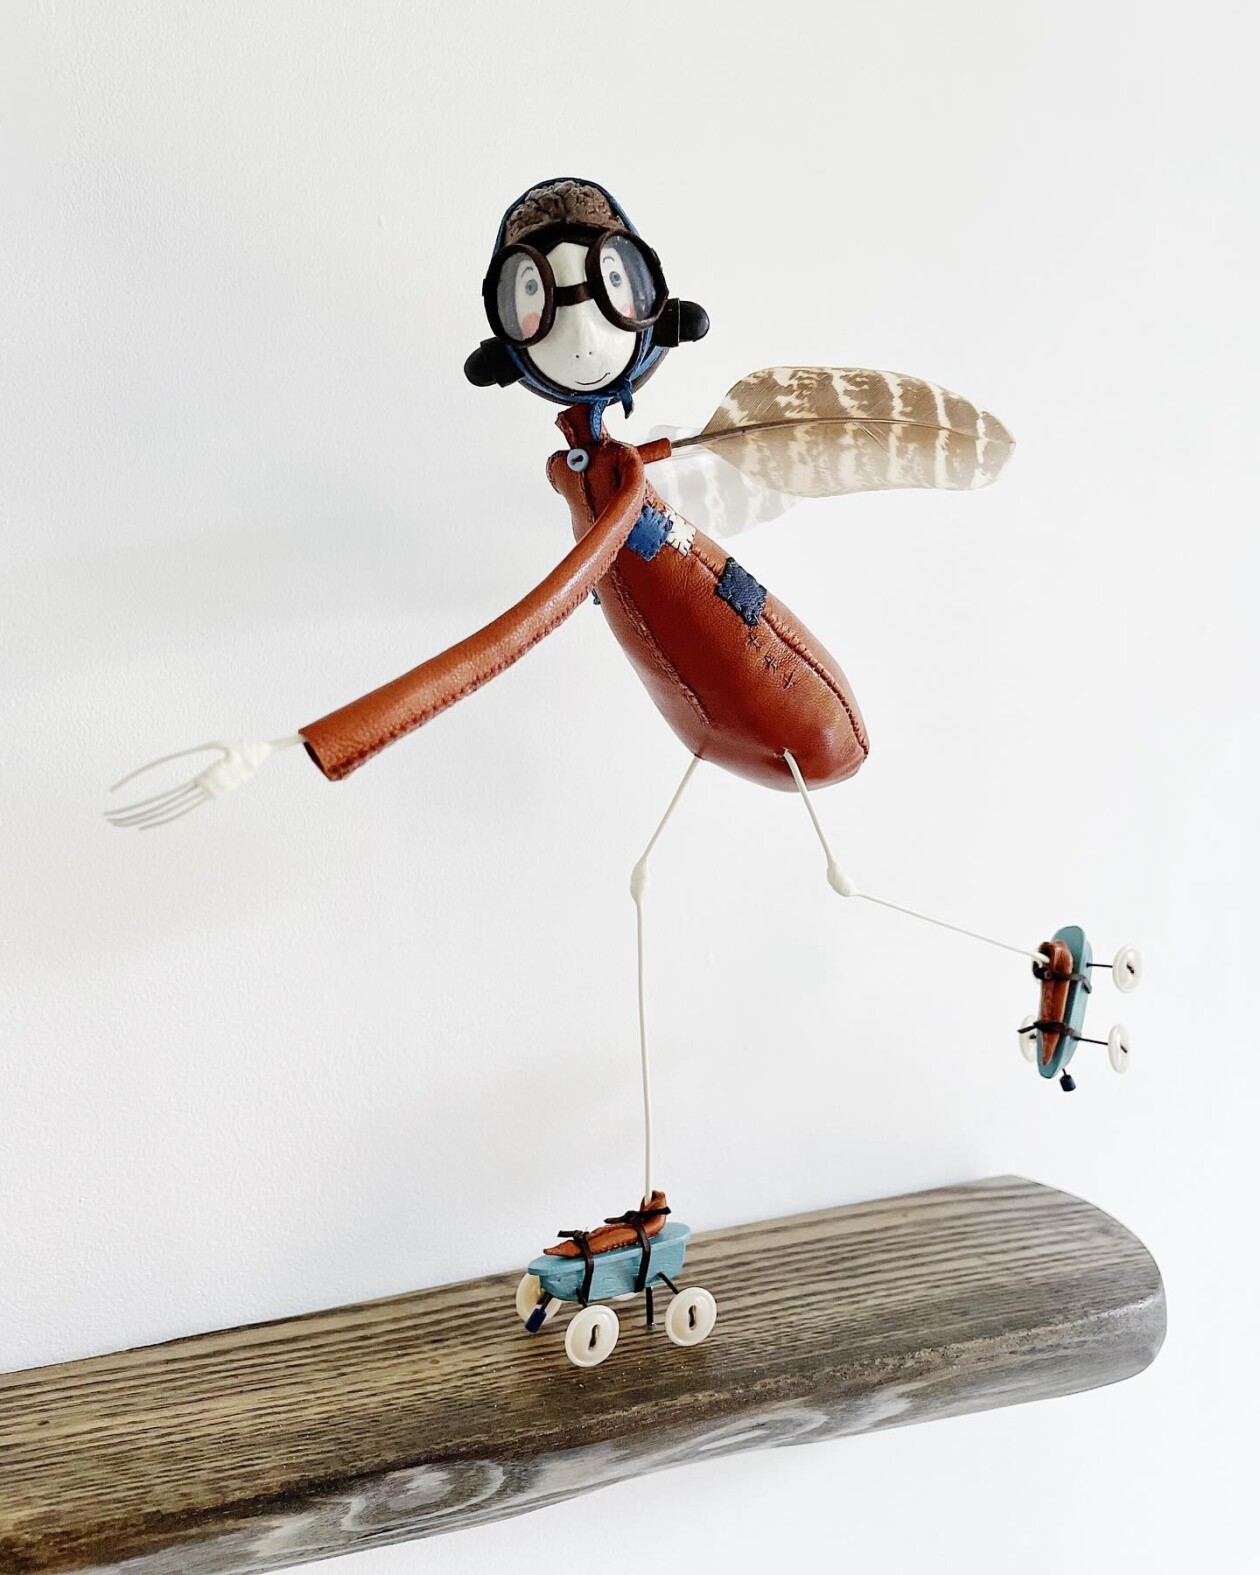 The Quirky And Amusing Fairy Lady Sculptures Of Samantha Bryan (16)